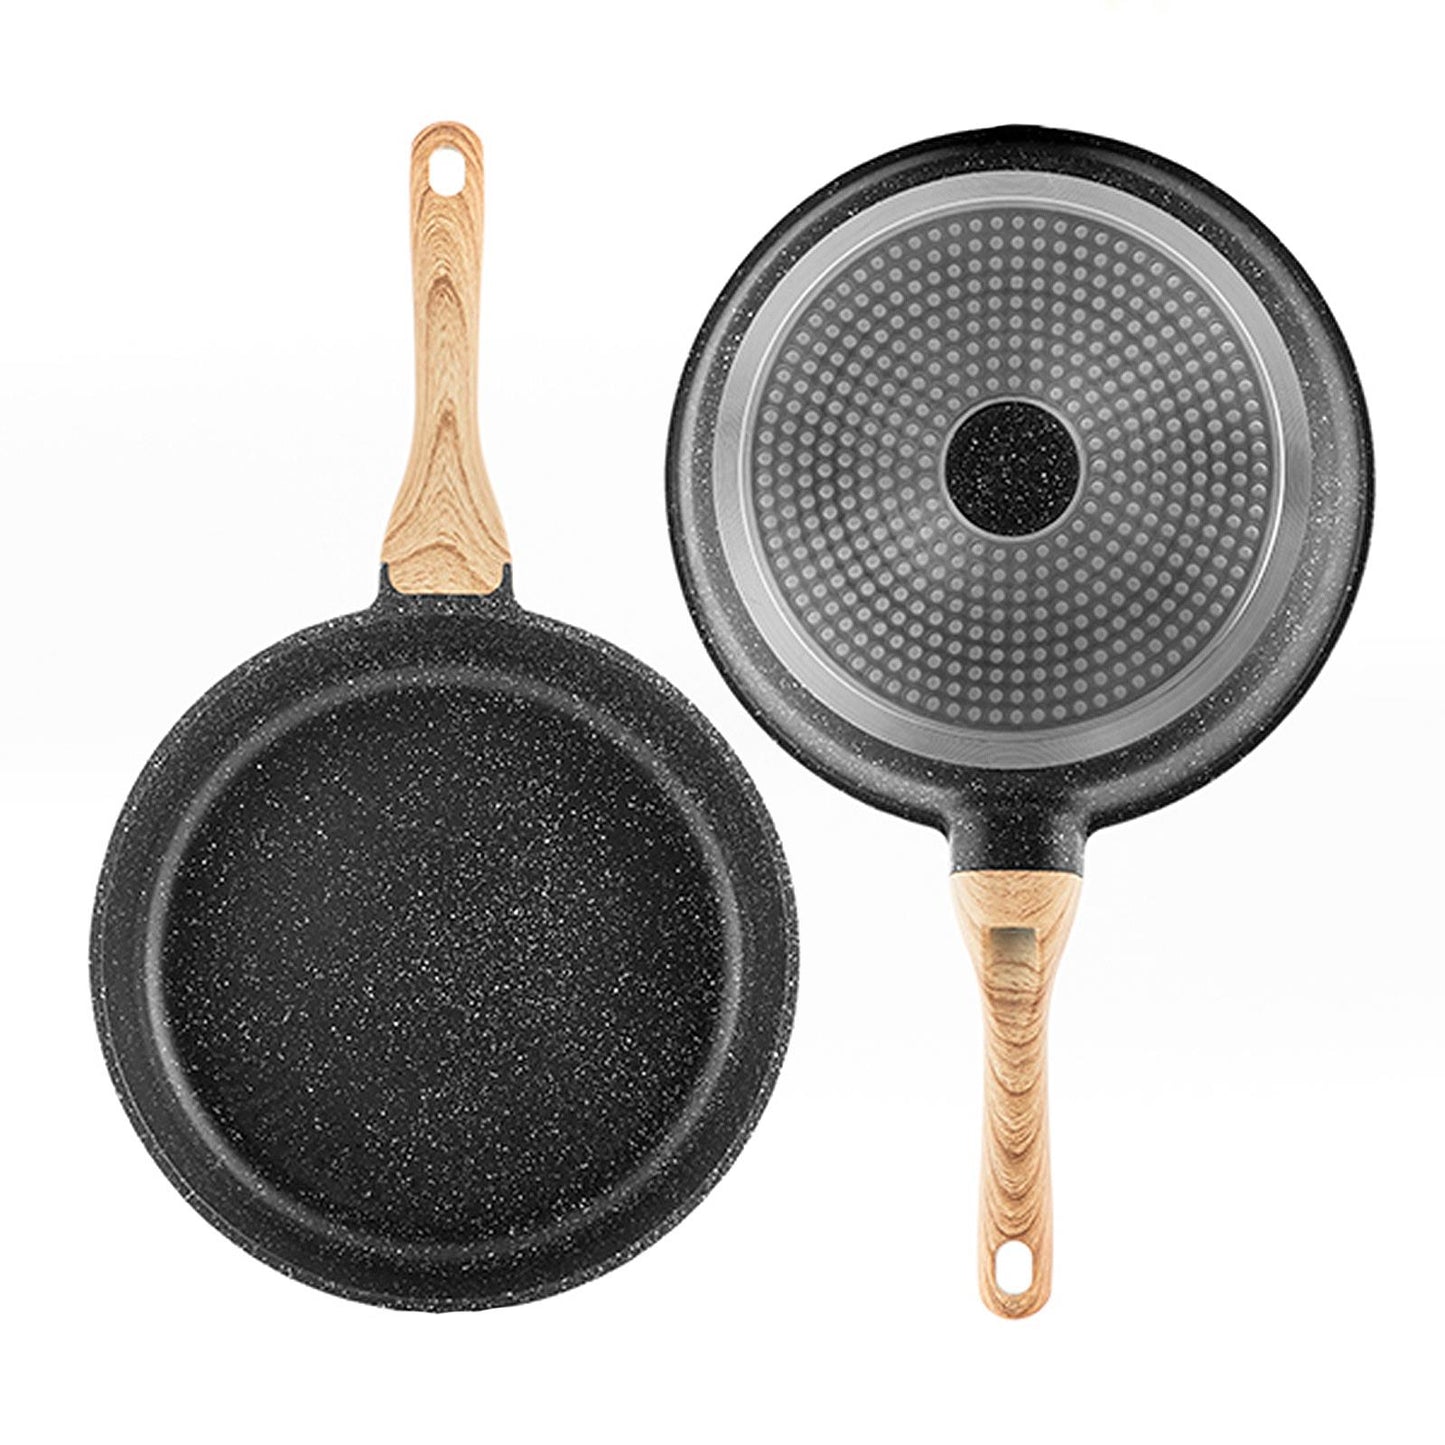 Non-Stick Aluminum Frying Pan With Heat-Resistant Handle And Easy To Clean Surface